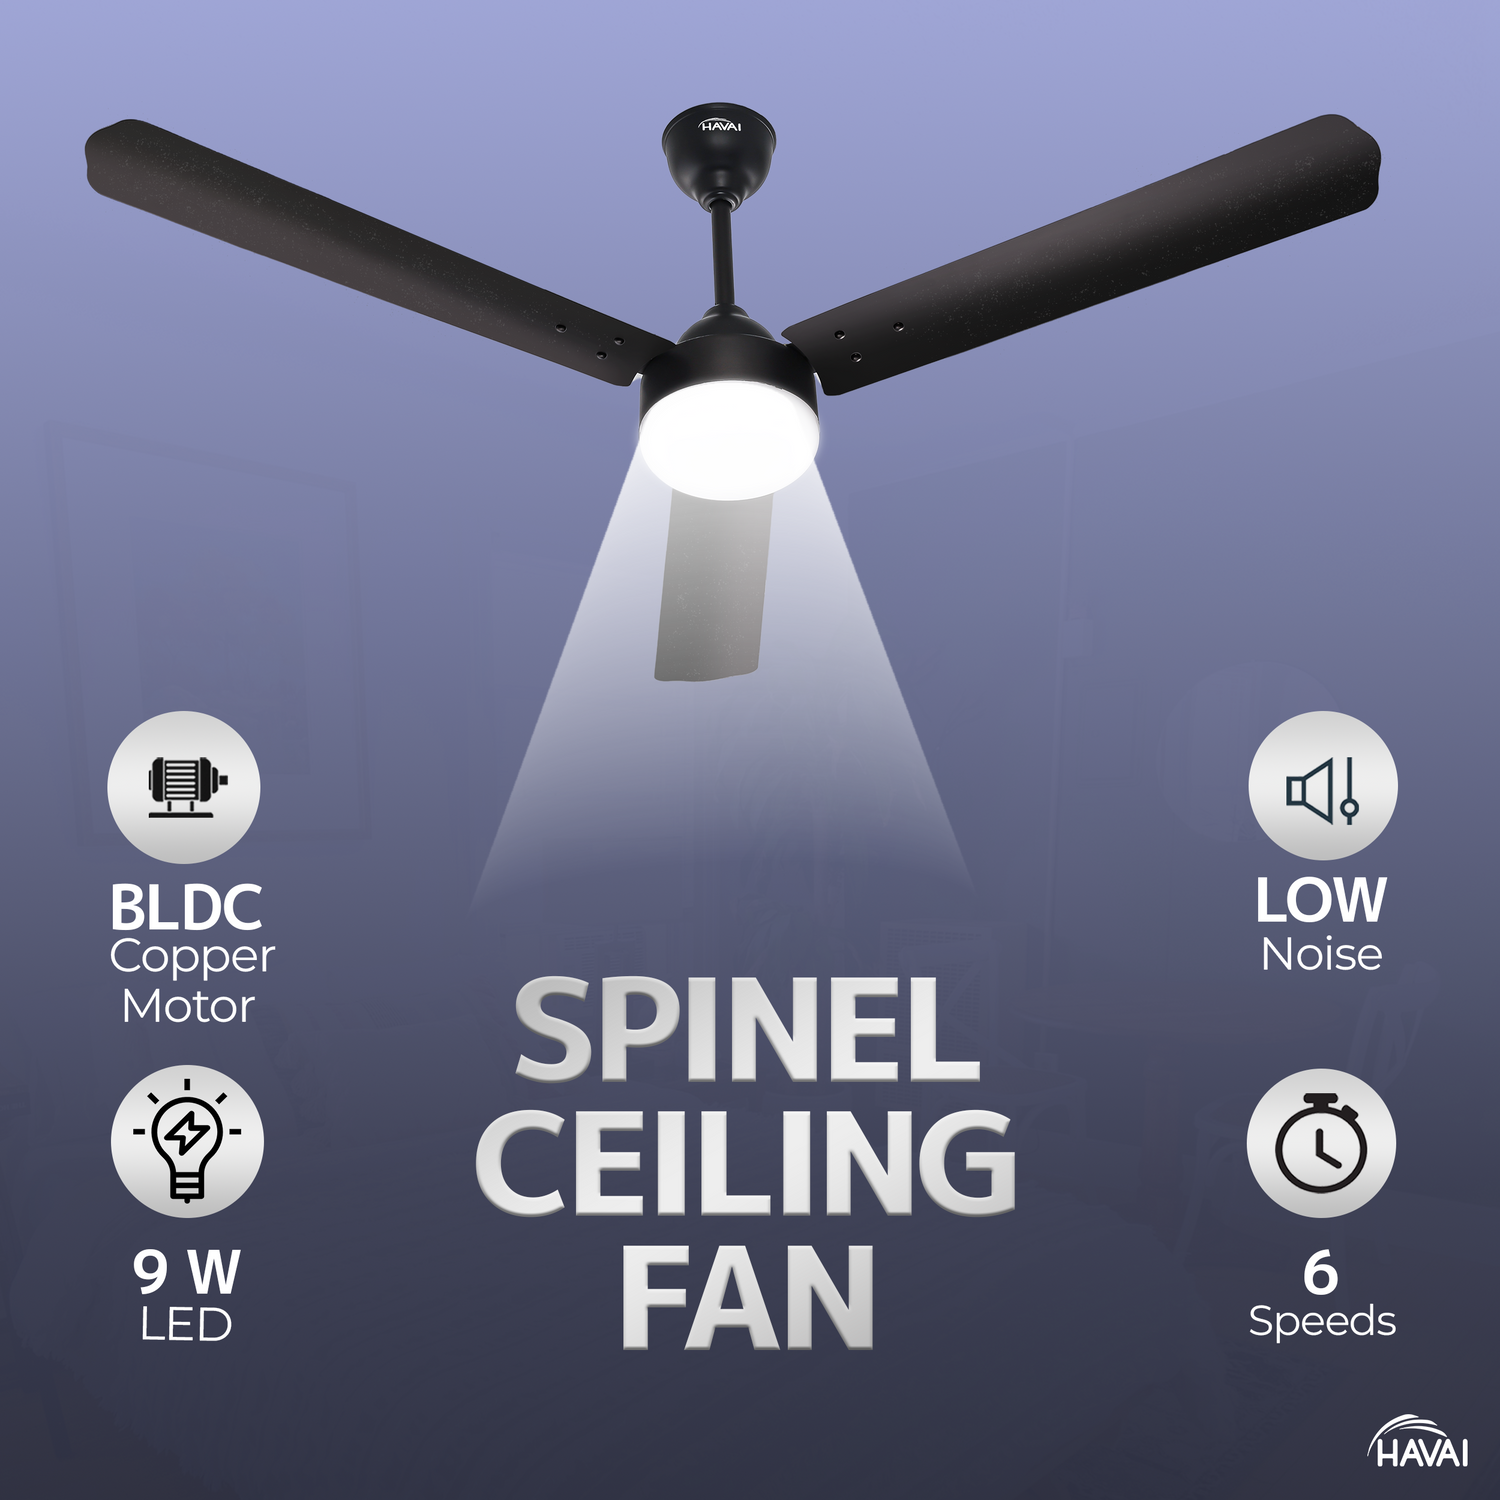 HAVAI Spinel BLDC Ceiling Fan 28W, 1200mm Blade with Remote - Smoky Brown,9W LED Light